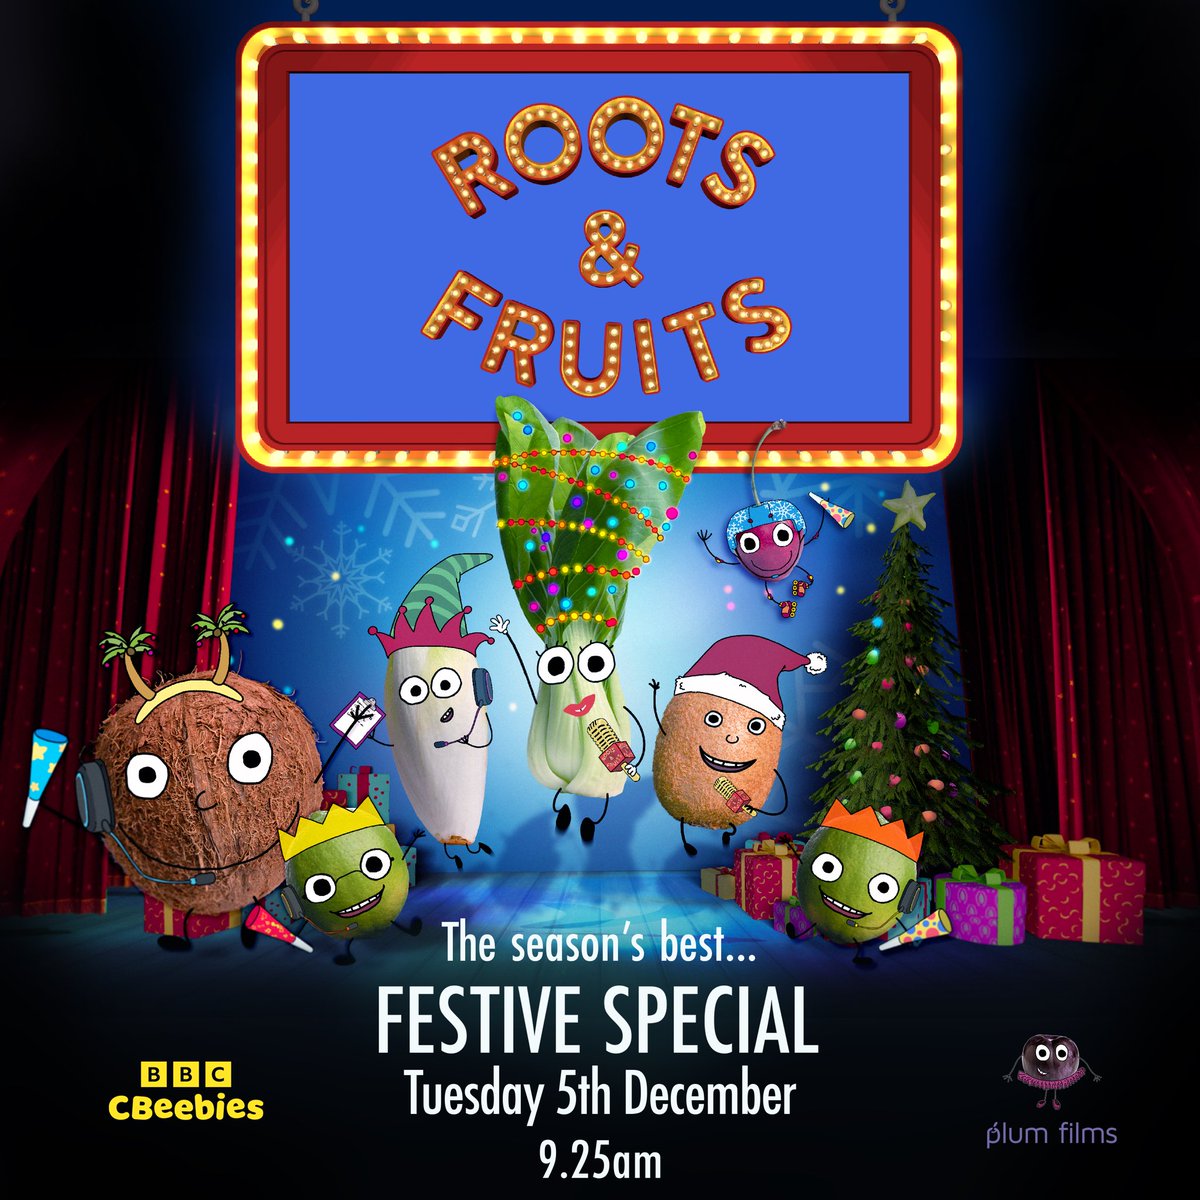 This wonderful animated series I’m proud to be a part of, Roots and Fruits, has a Festive Special! The brand new episode is on Cbeebies Tuesday 5th December at 09.25am and then also on BBC iPlayer. #rootsandfruits #cbeebies #festivespecial #pakchoi 🥬🎄